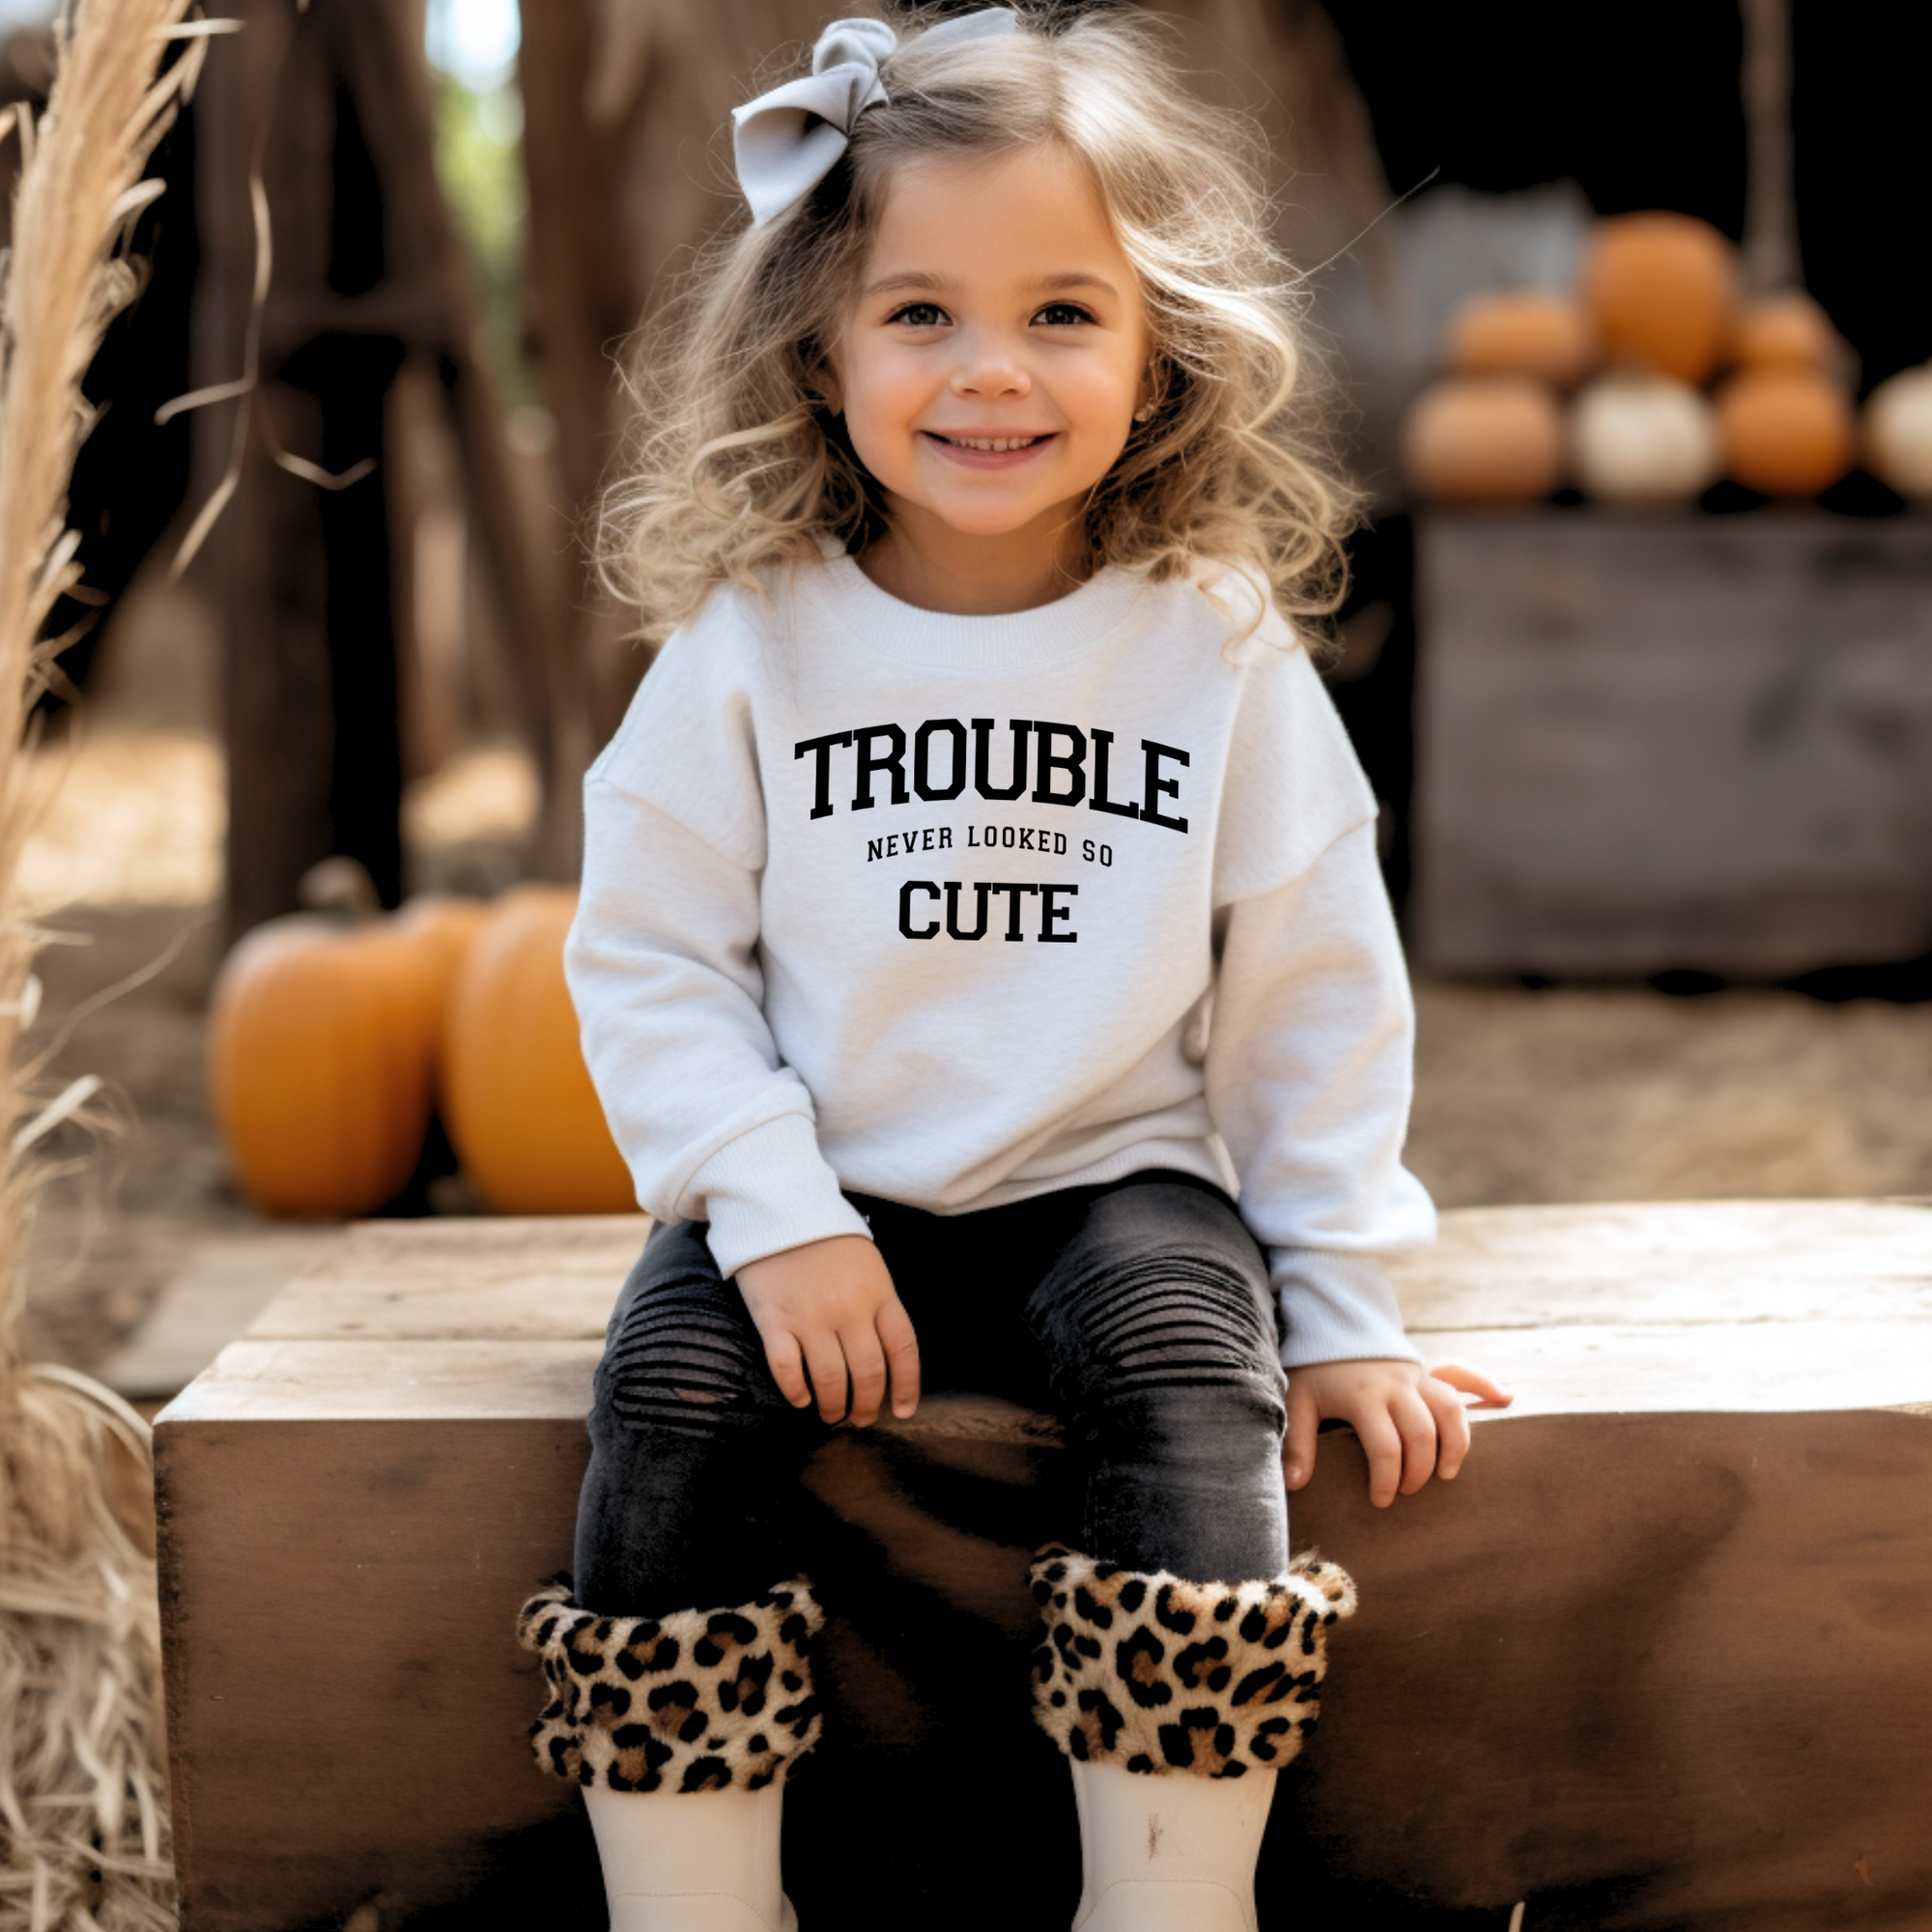 Trouble Never Looked So Cute (Shirts also available)